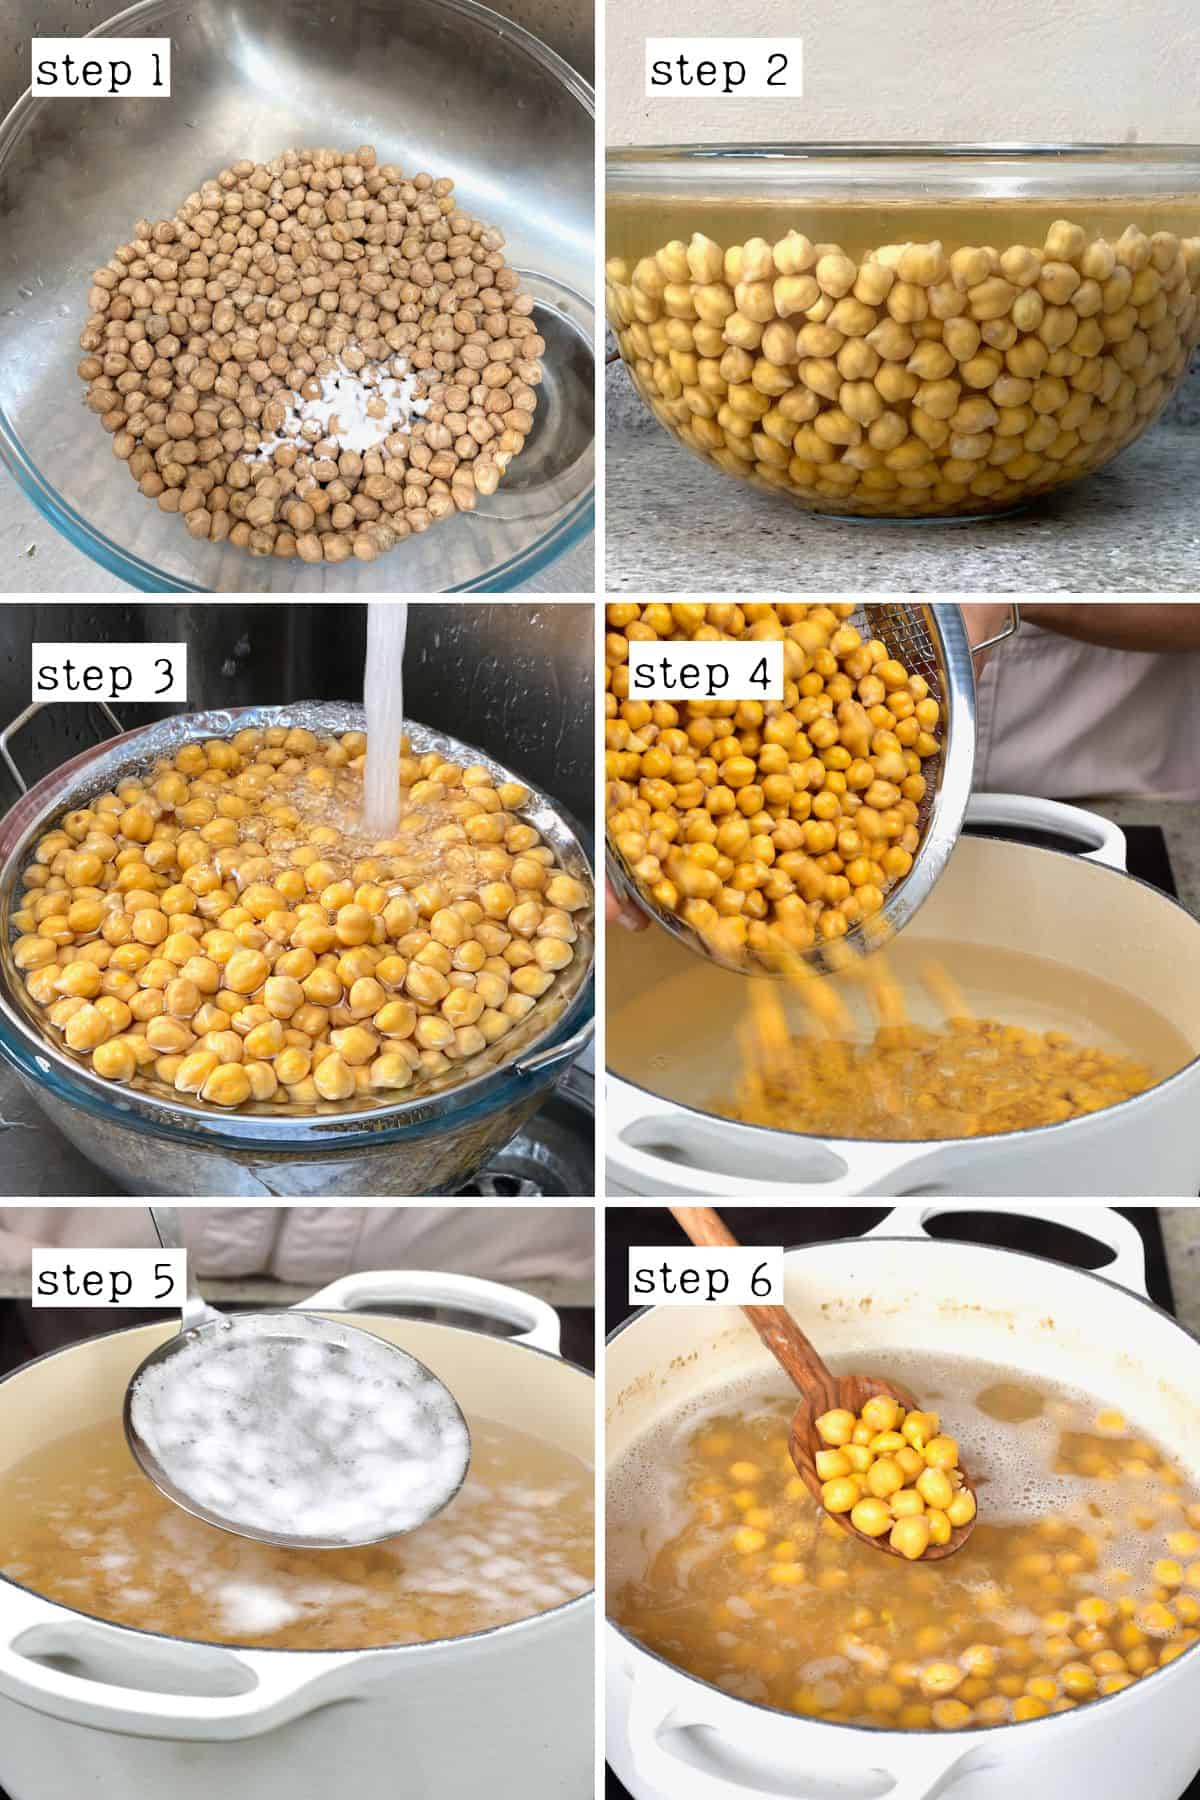 Steps for preparing and cooking chickpeas